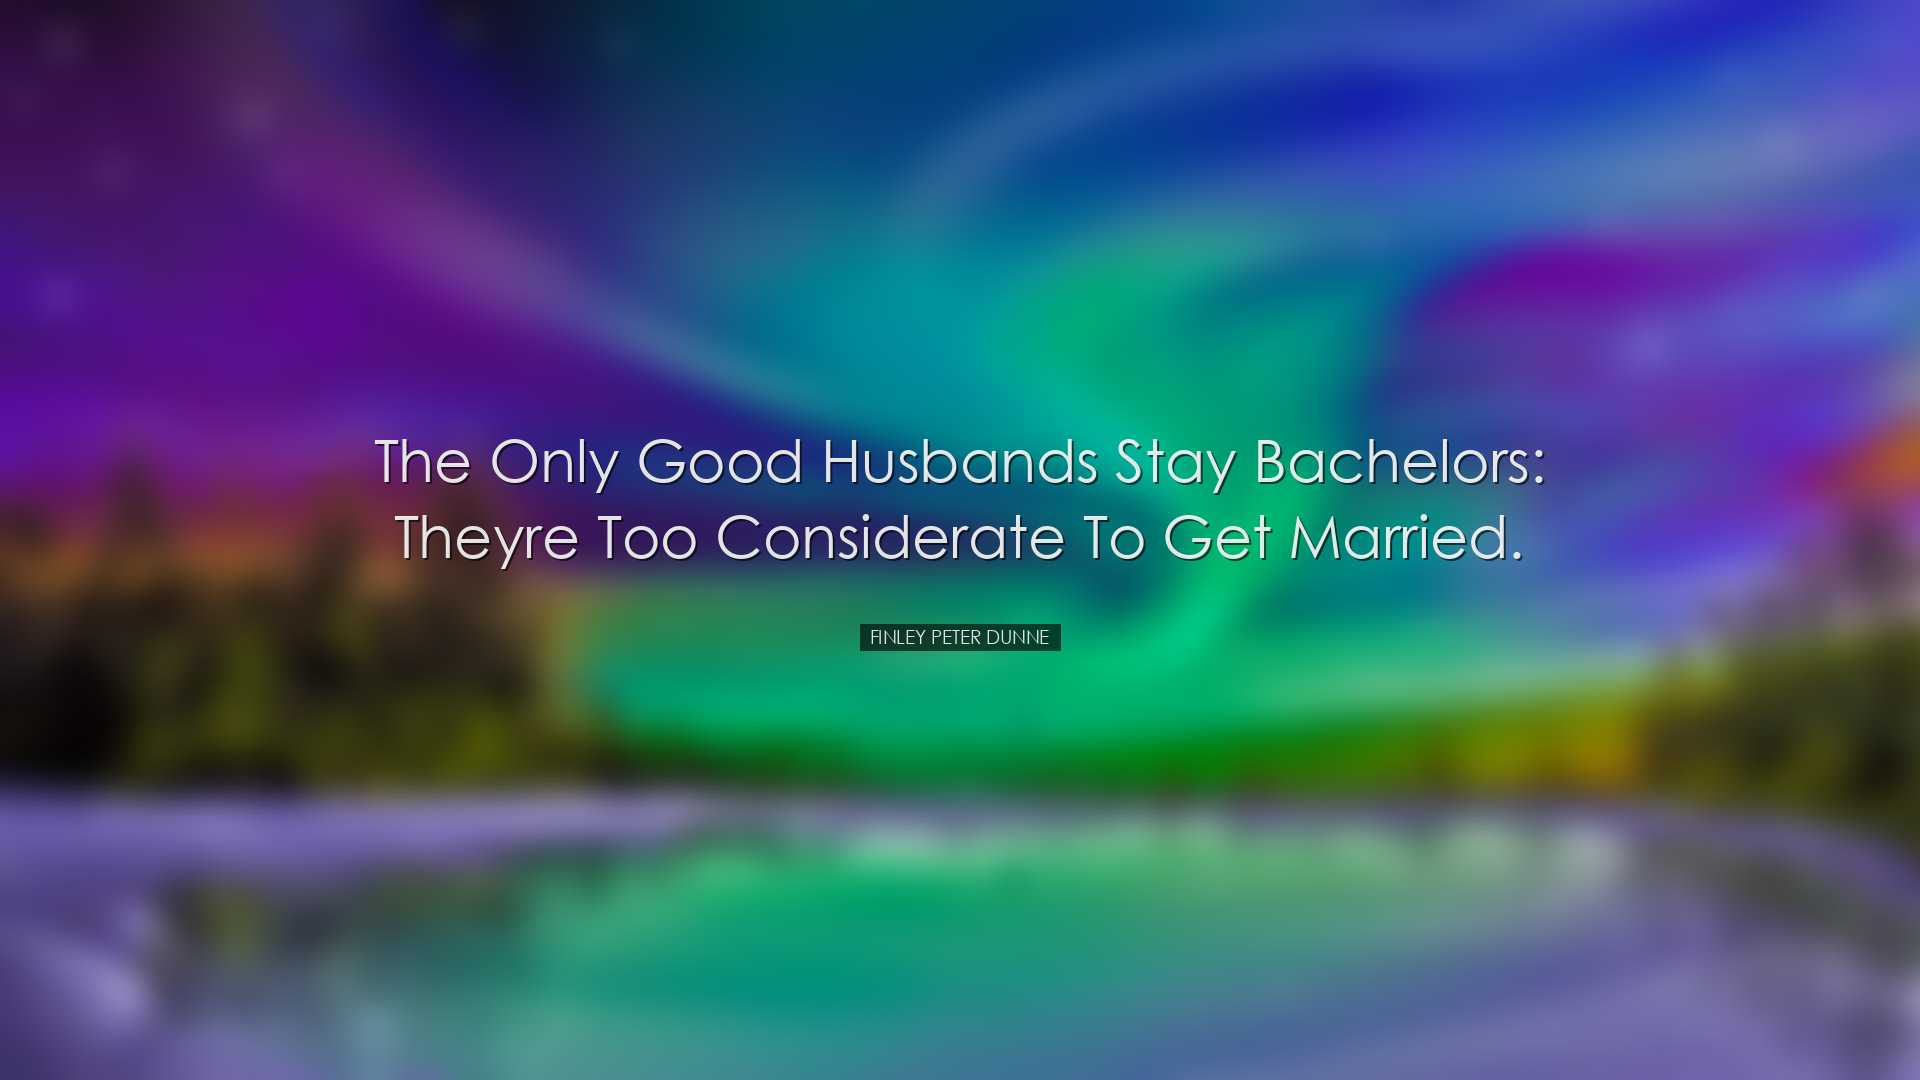 The only good husbands stay bachelors: Theyre too considerate to g